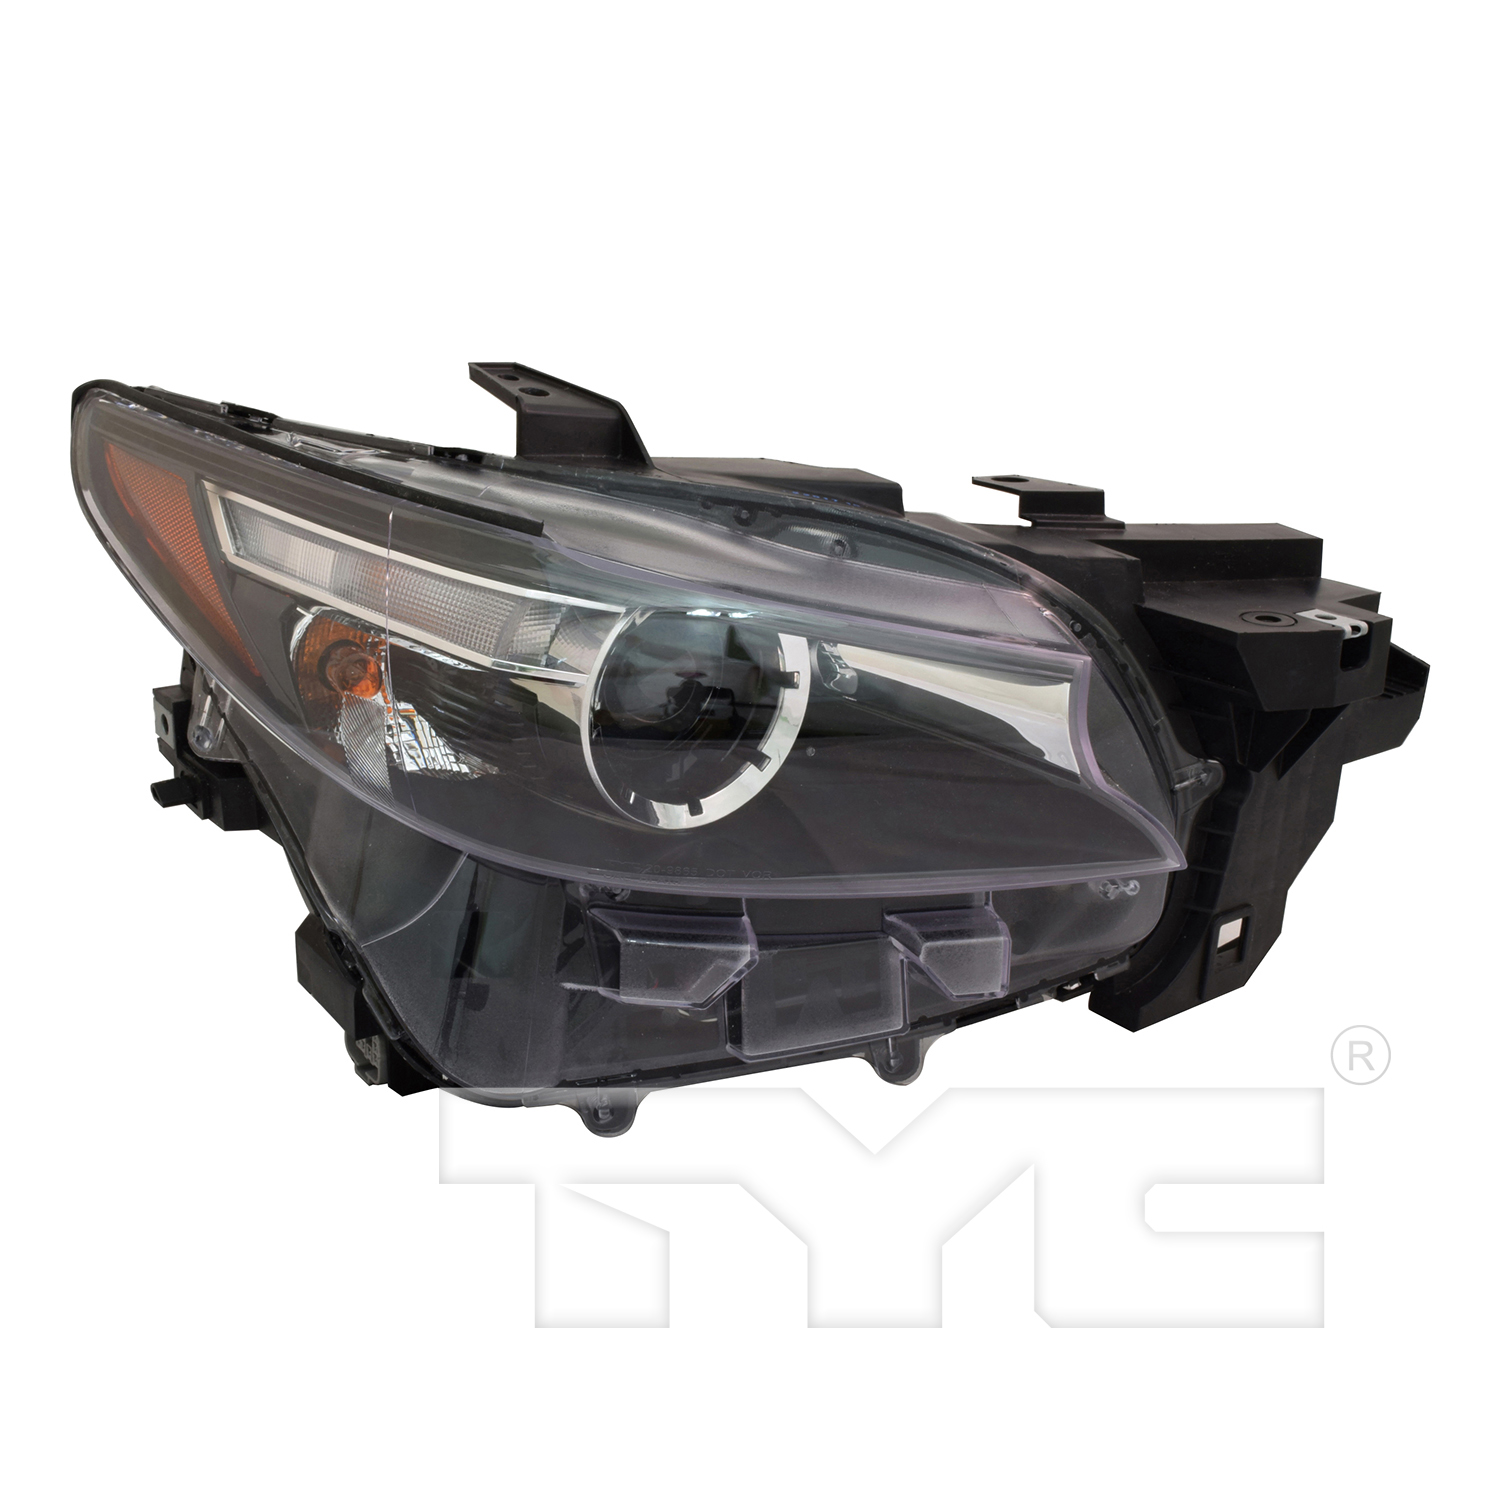 Aftermarket HEADLIGHTS for MAZDA - CX-9, CX-9,16-22,RT Headlamp assy composite